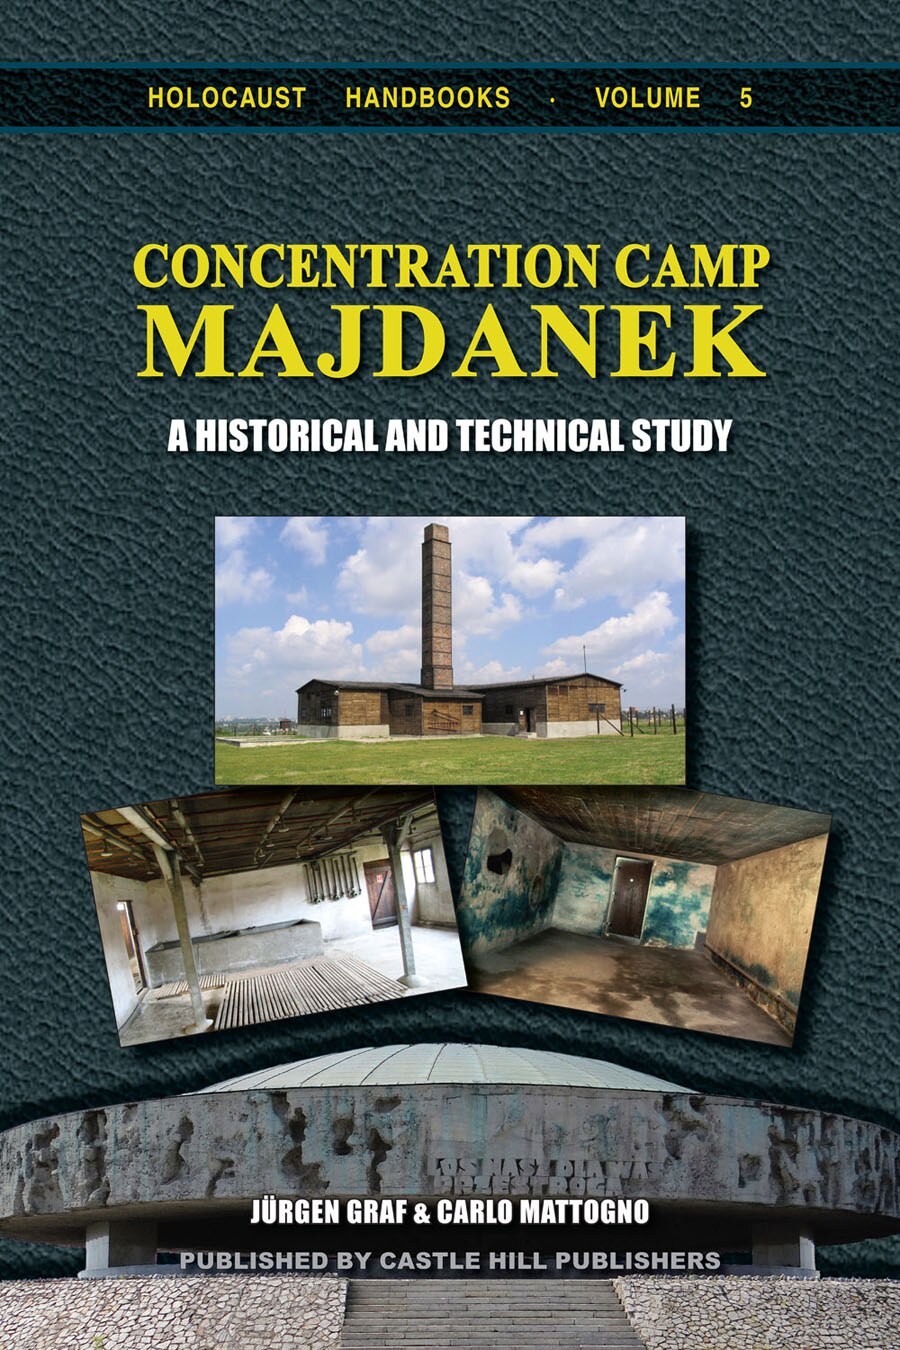 Concentration Camp Majdanek:  A Historical and Technical Study